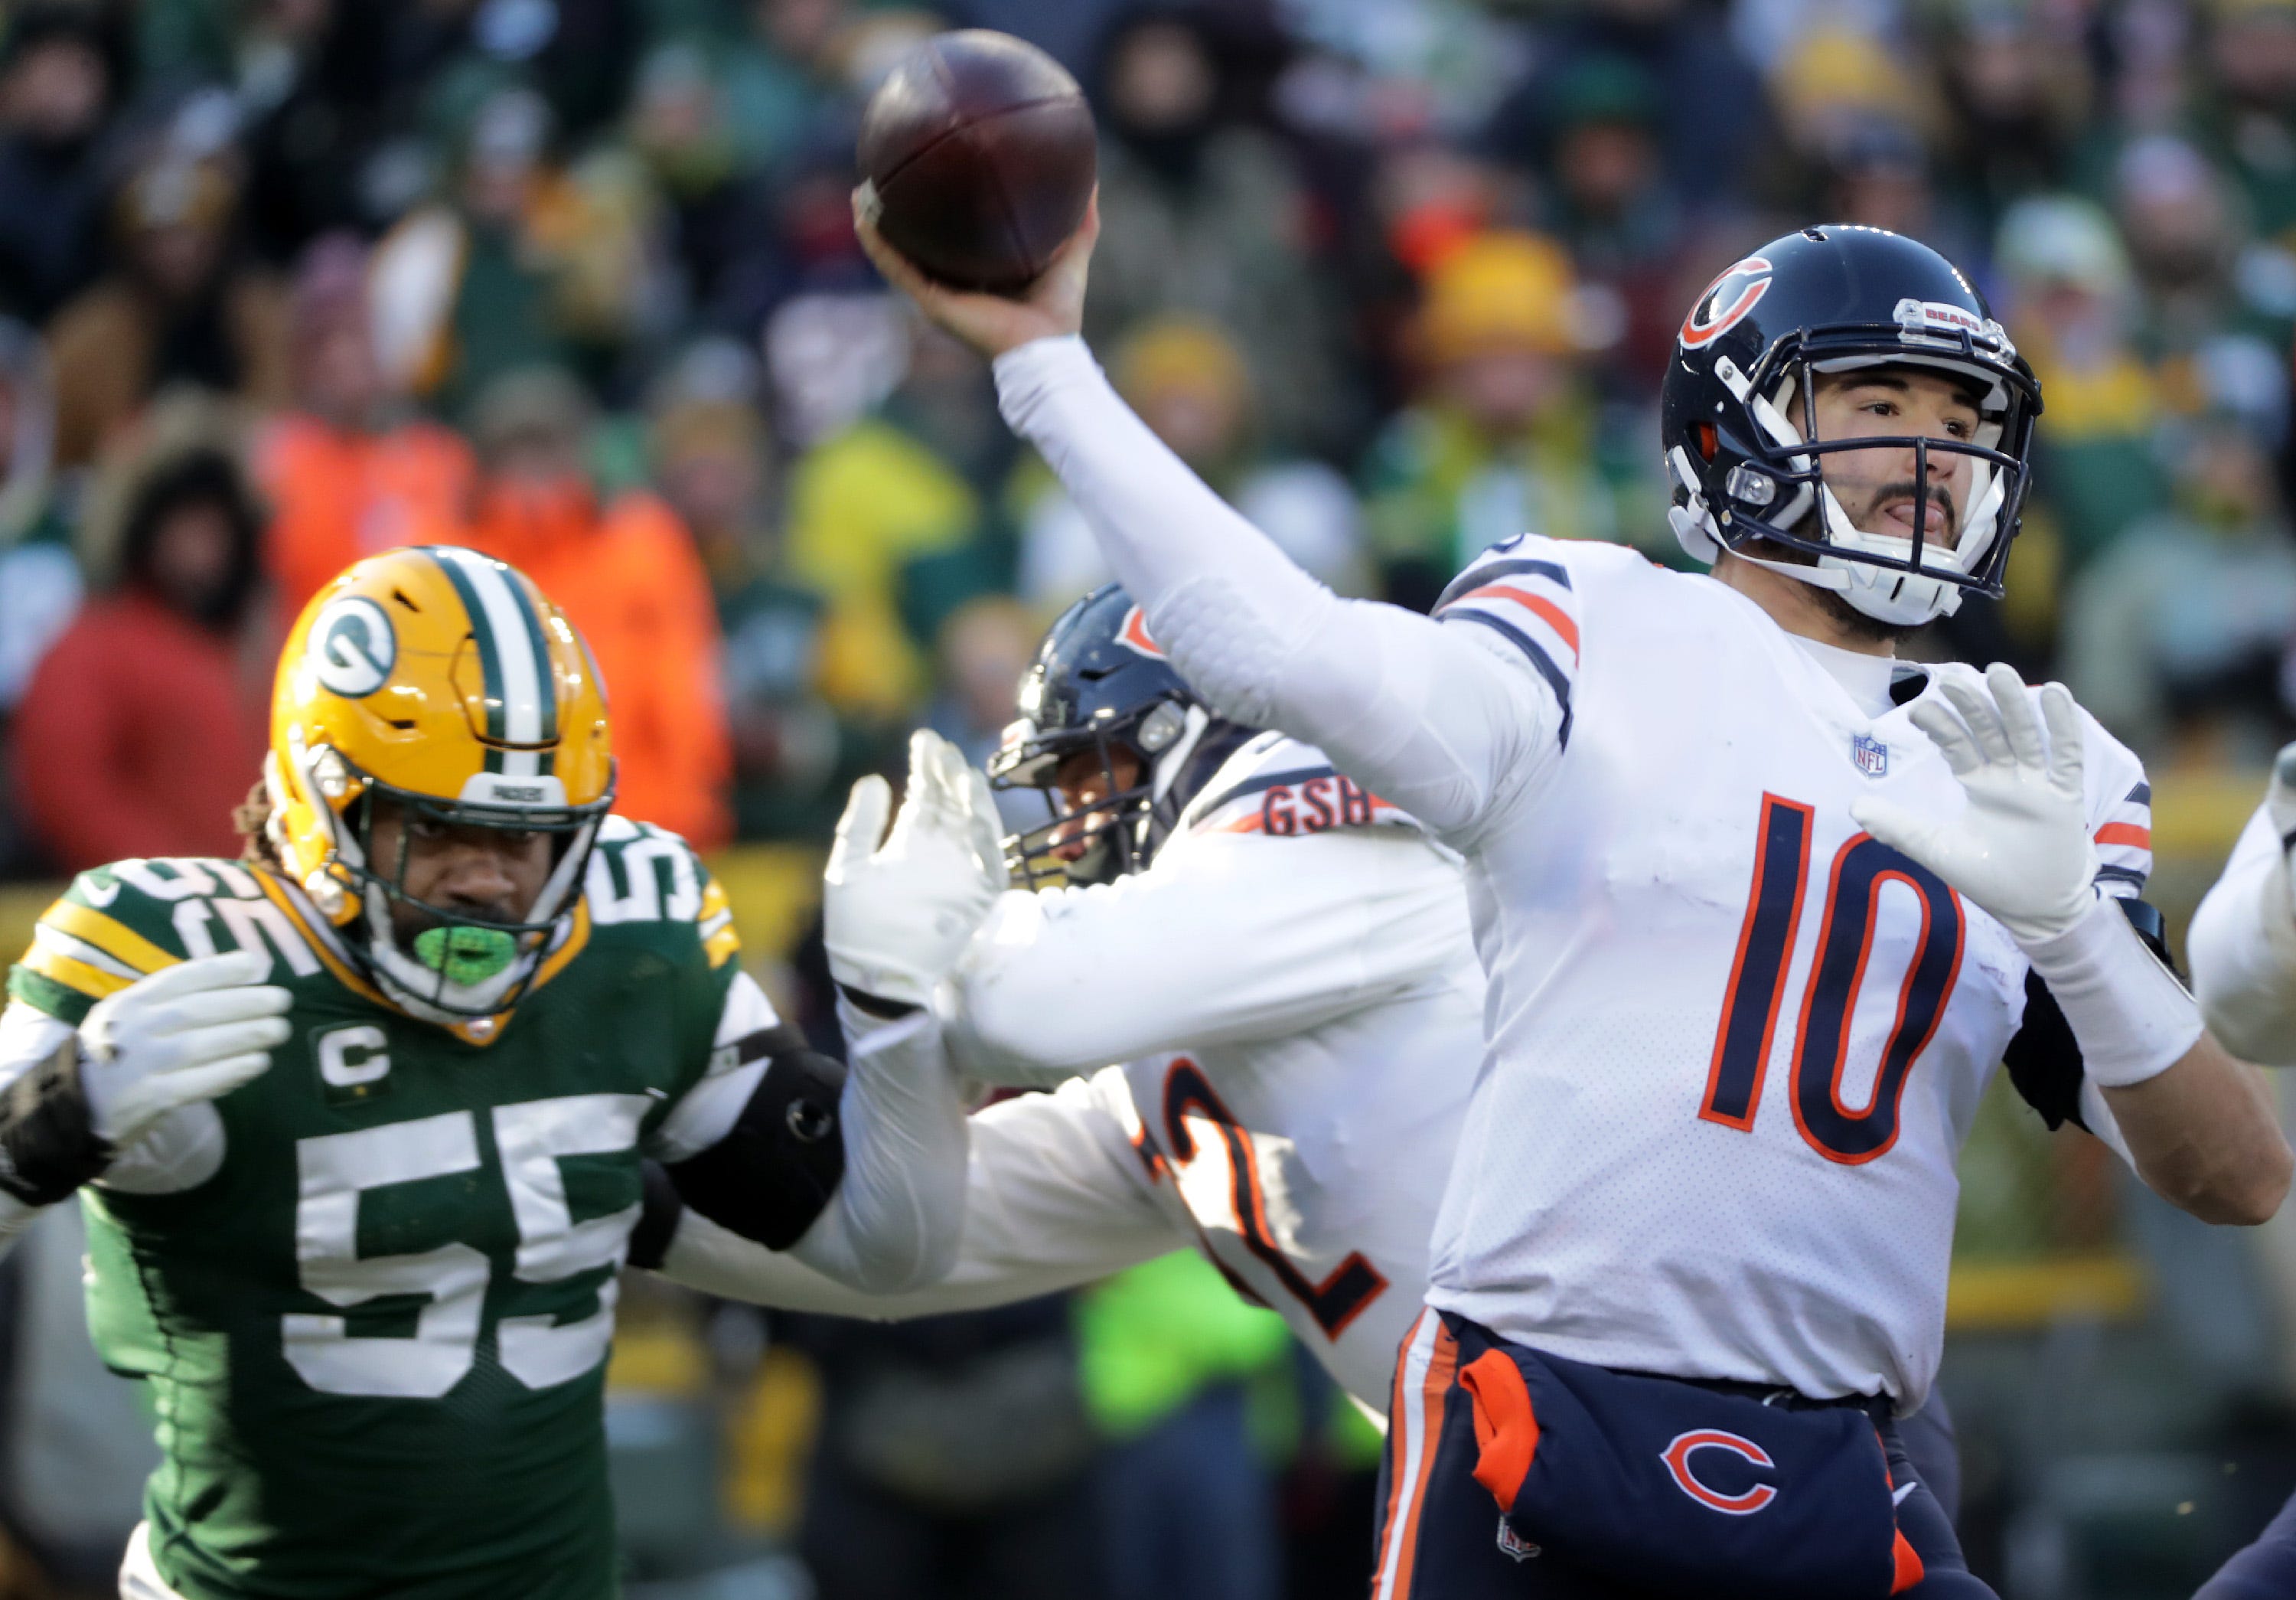 Green Bay Packers outside linebacker Za'Darius Smith (55) rushes -Chicago Bears quarterback Mitchell Trubisky (10) during their football game on Sunday, December 15, 2019, at Lambeau Field in Green Bay, Wis.